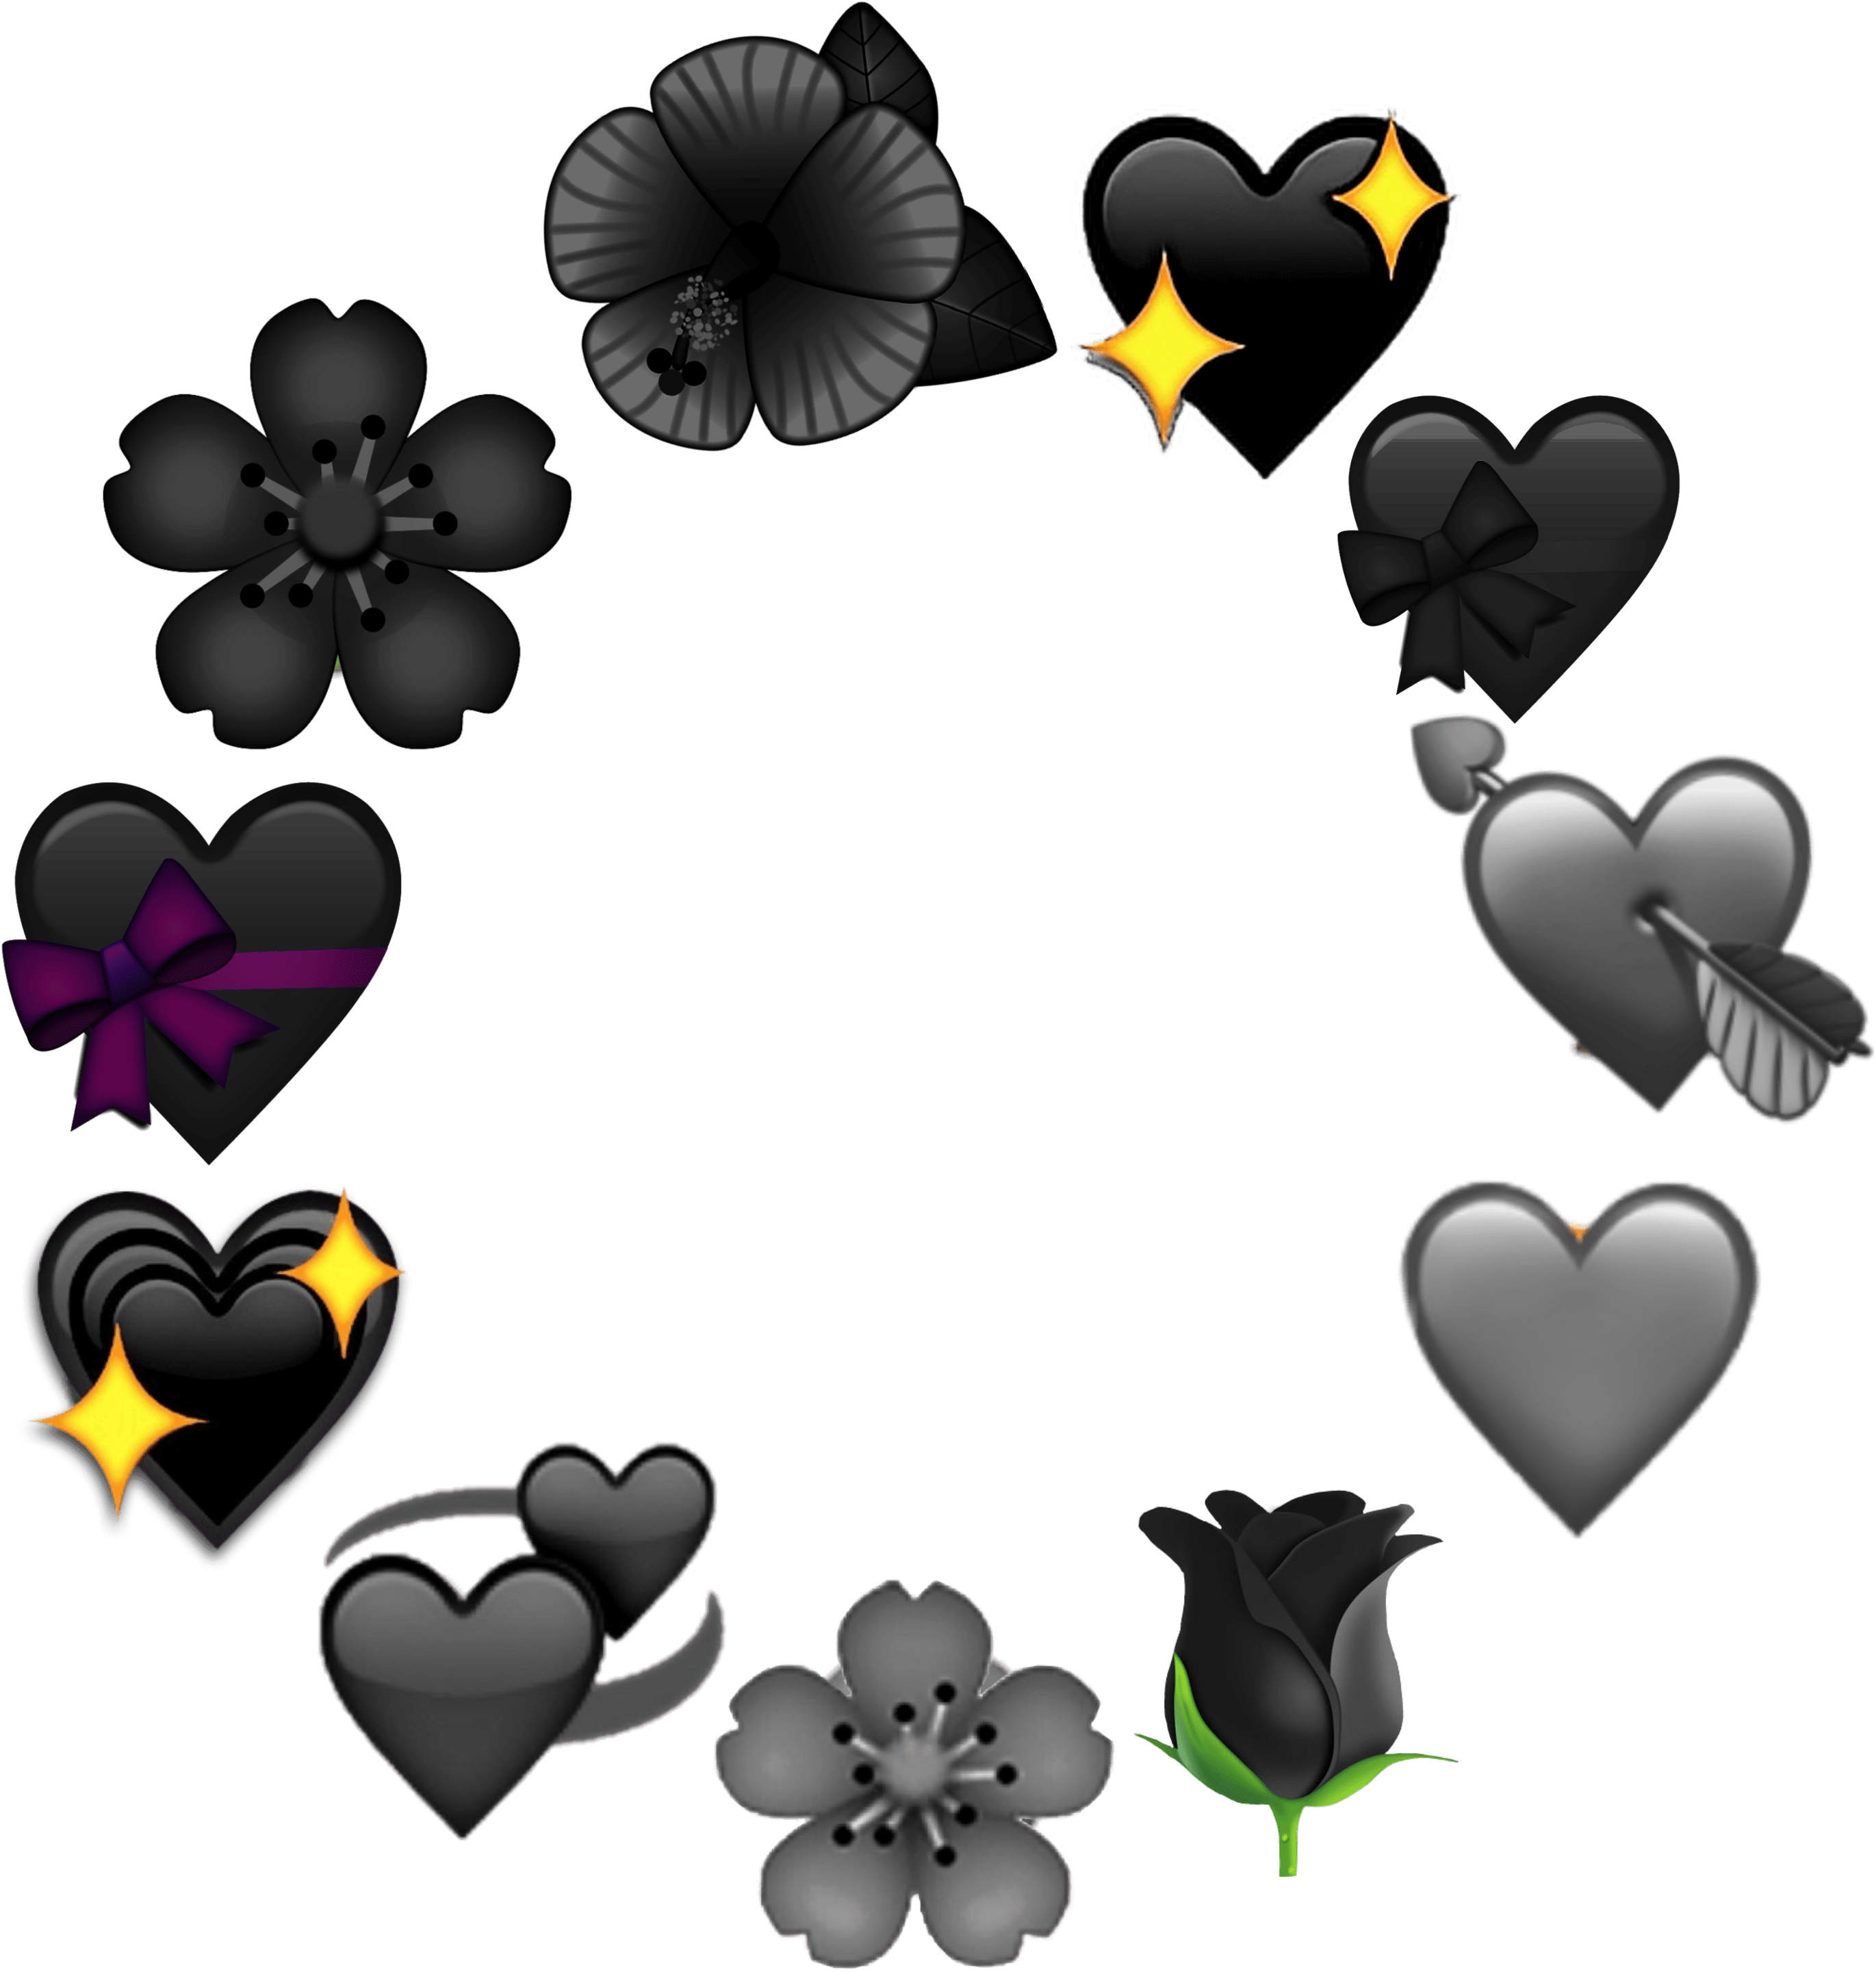 Assorted_ Black_ Heart_and_ Flower_ Emojis PNG